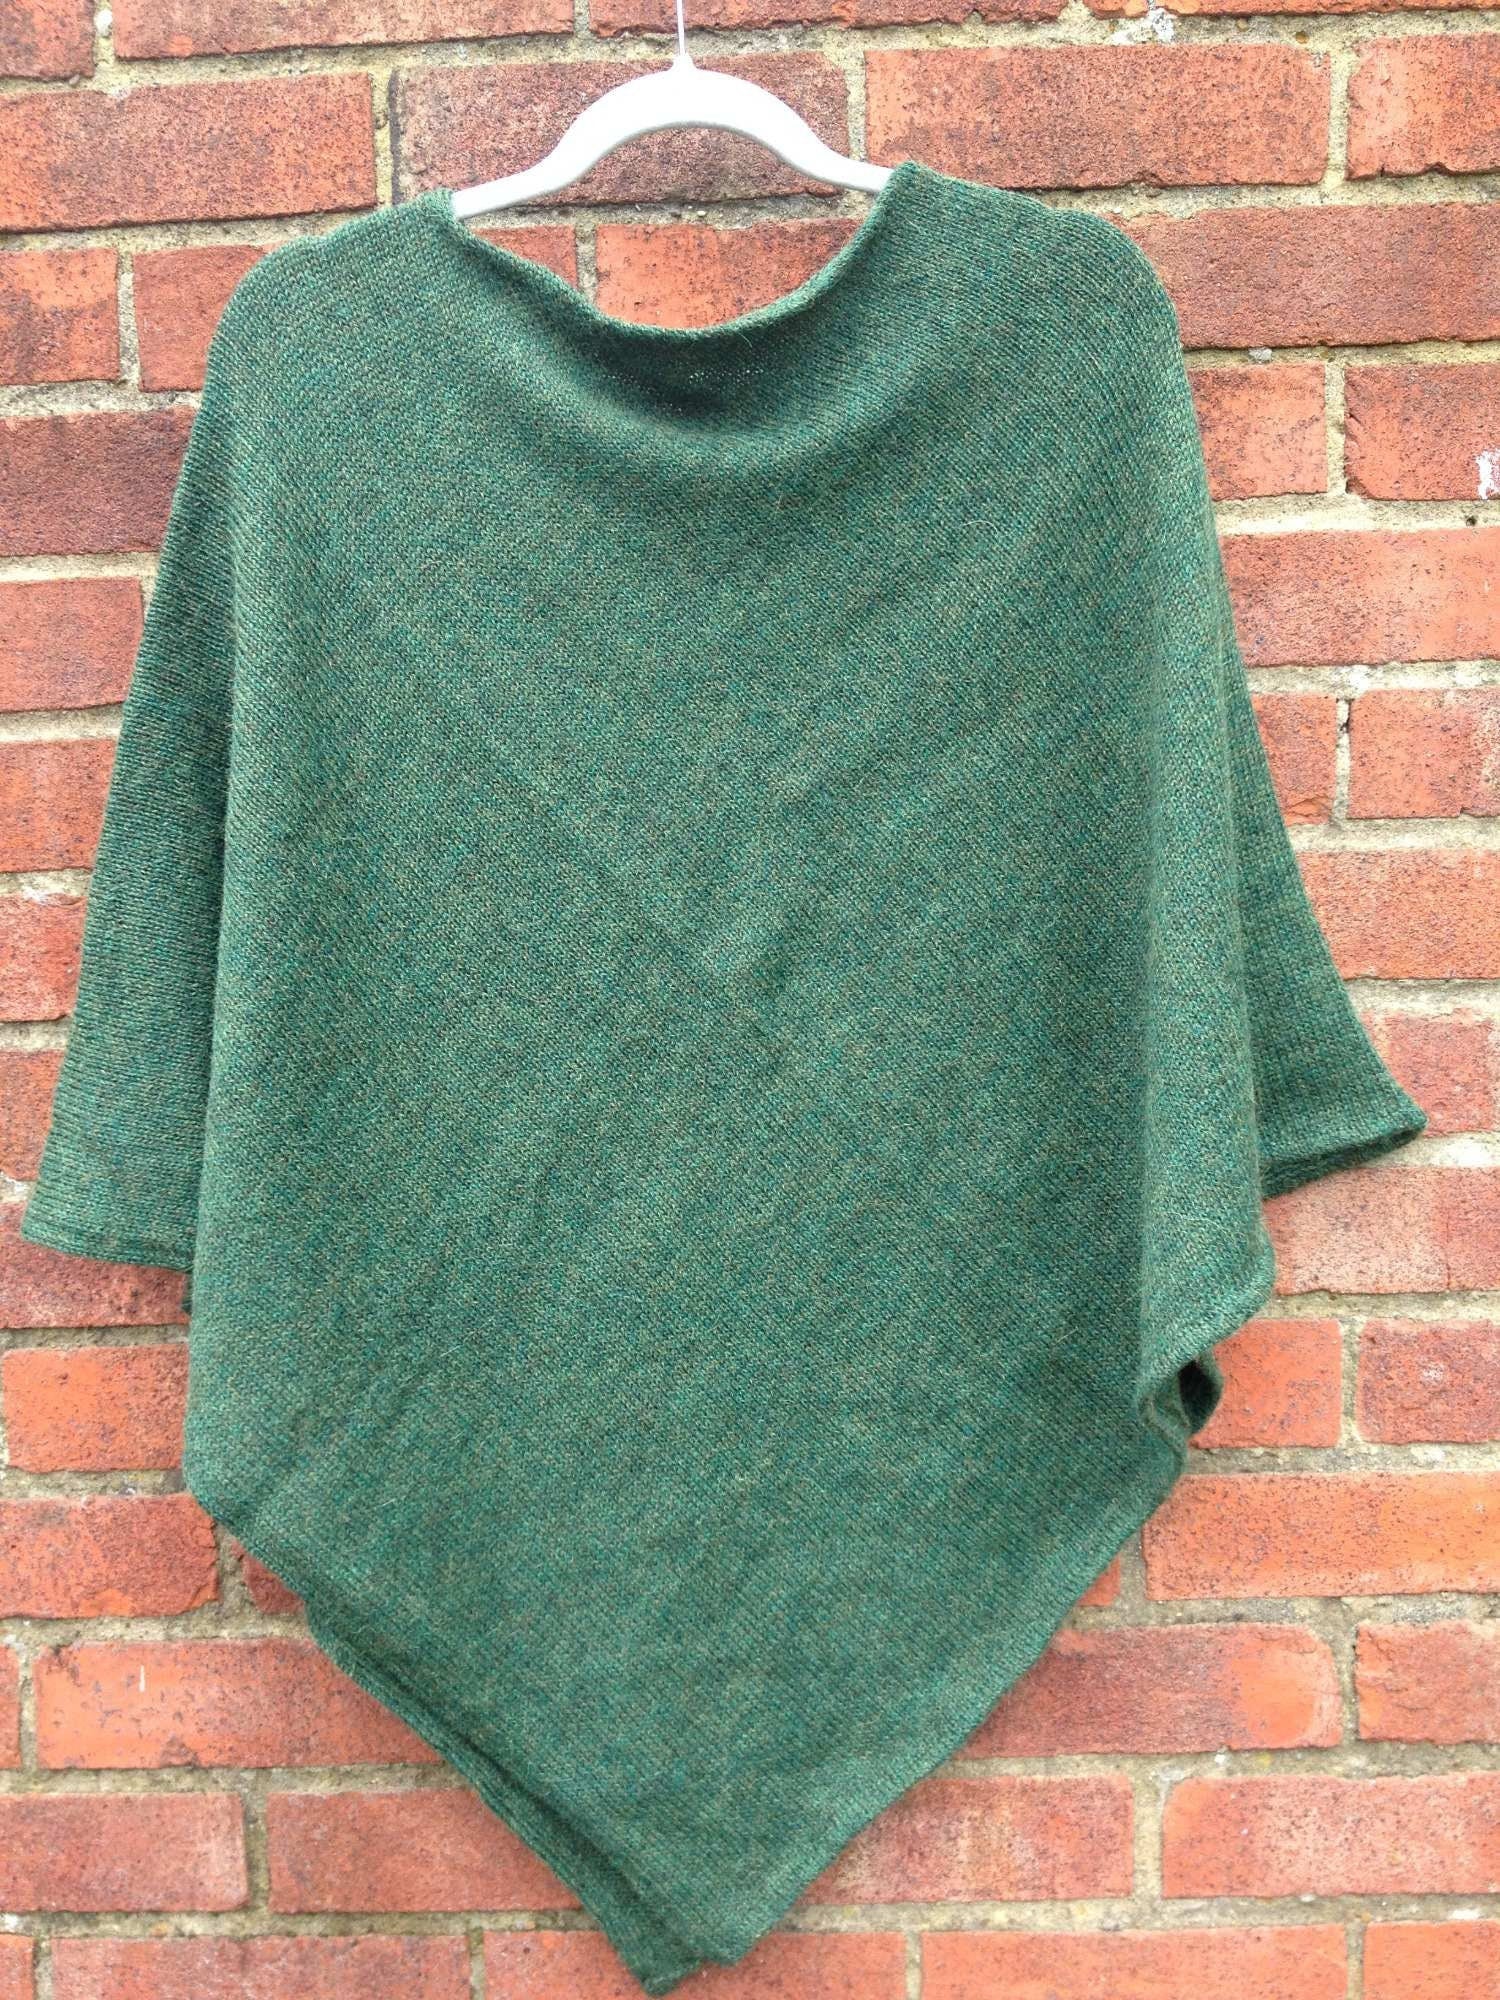 Poncho, wool knit 100% Alpaca fibre, Shawl, loose fit cosy soft travel wrap, knitted woollen poncho, pure alpaca, ethical, eco, plastic free